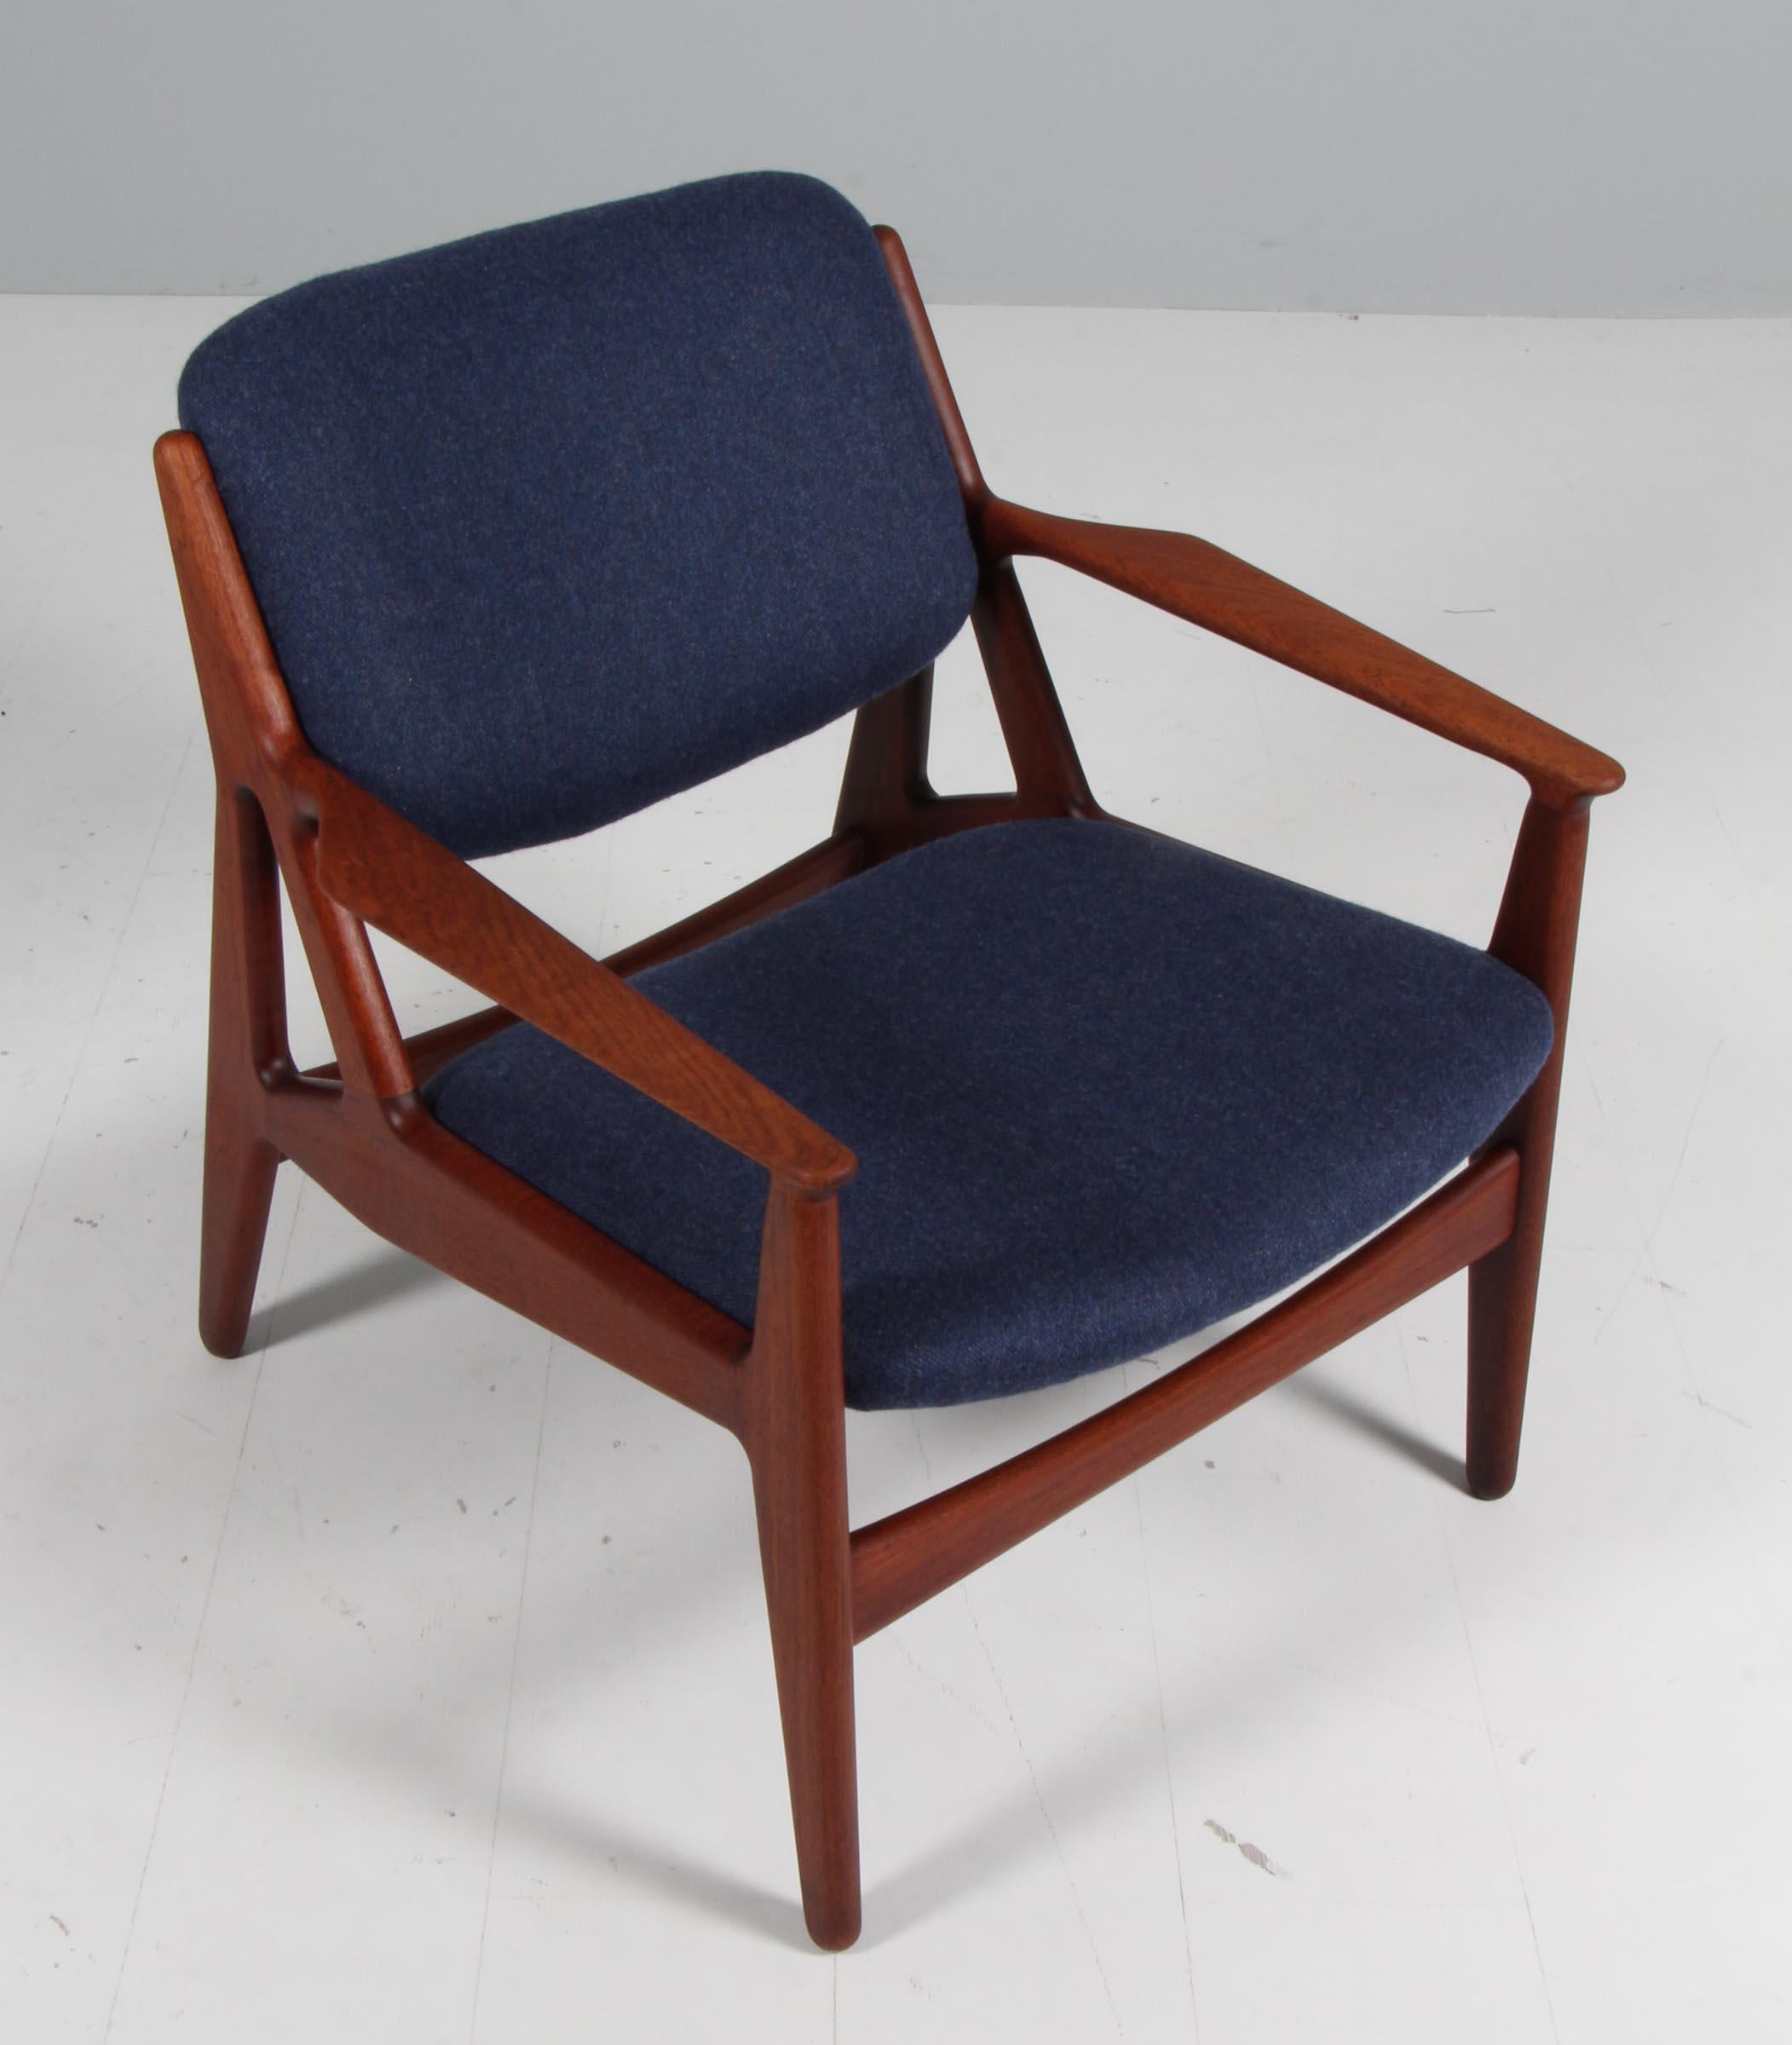 Arne Vodder lounge chair in solid teak.

New upholstered cushions with blue wool.

Made by Vamo.